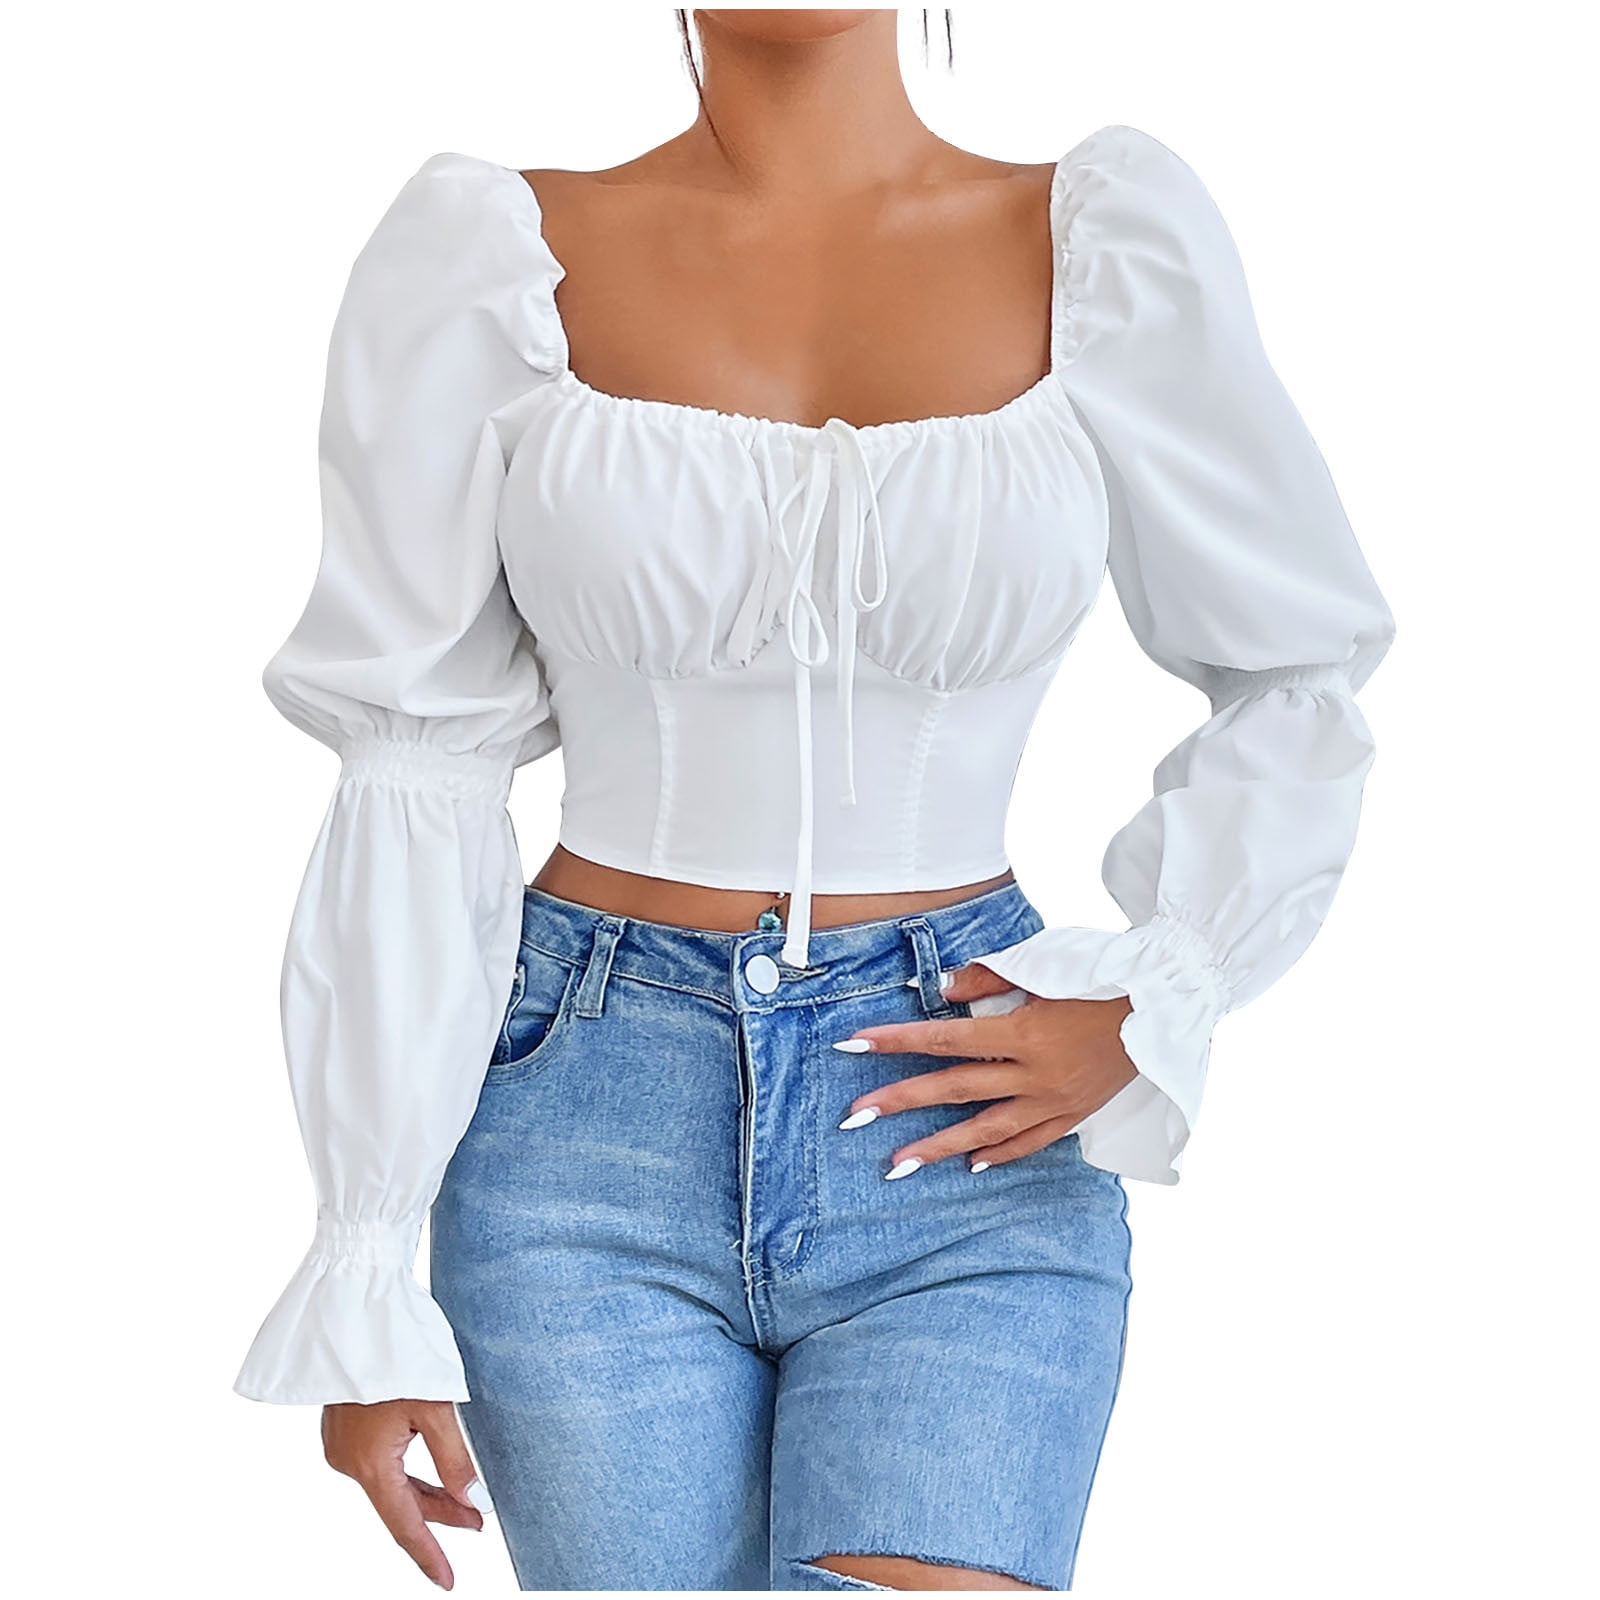 hirigin Women Crop Tops, Square Neck Puff Sleeve Blouse Floral Print with  Zipper for Spring Summer, White 